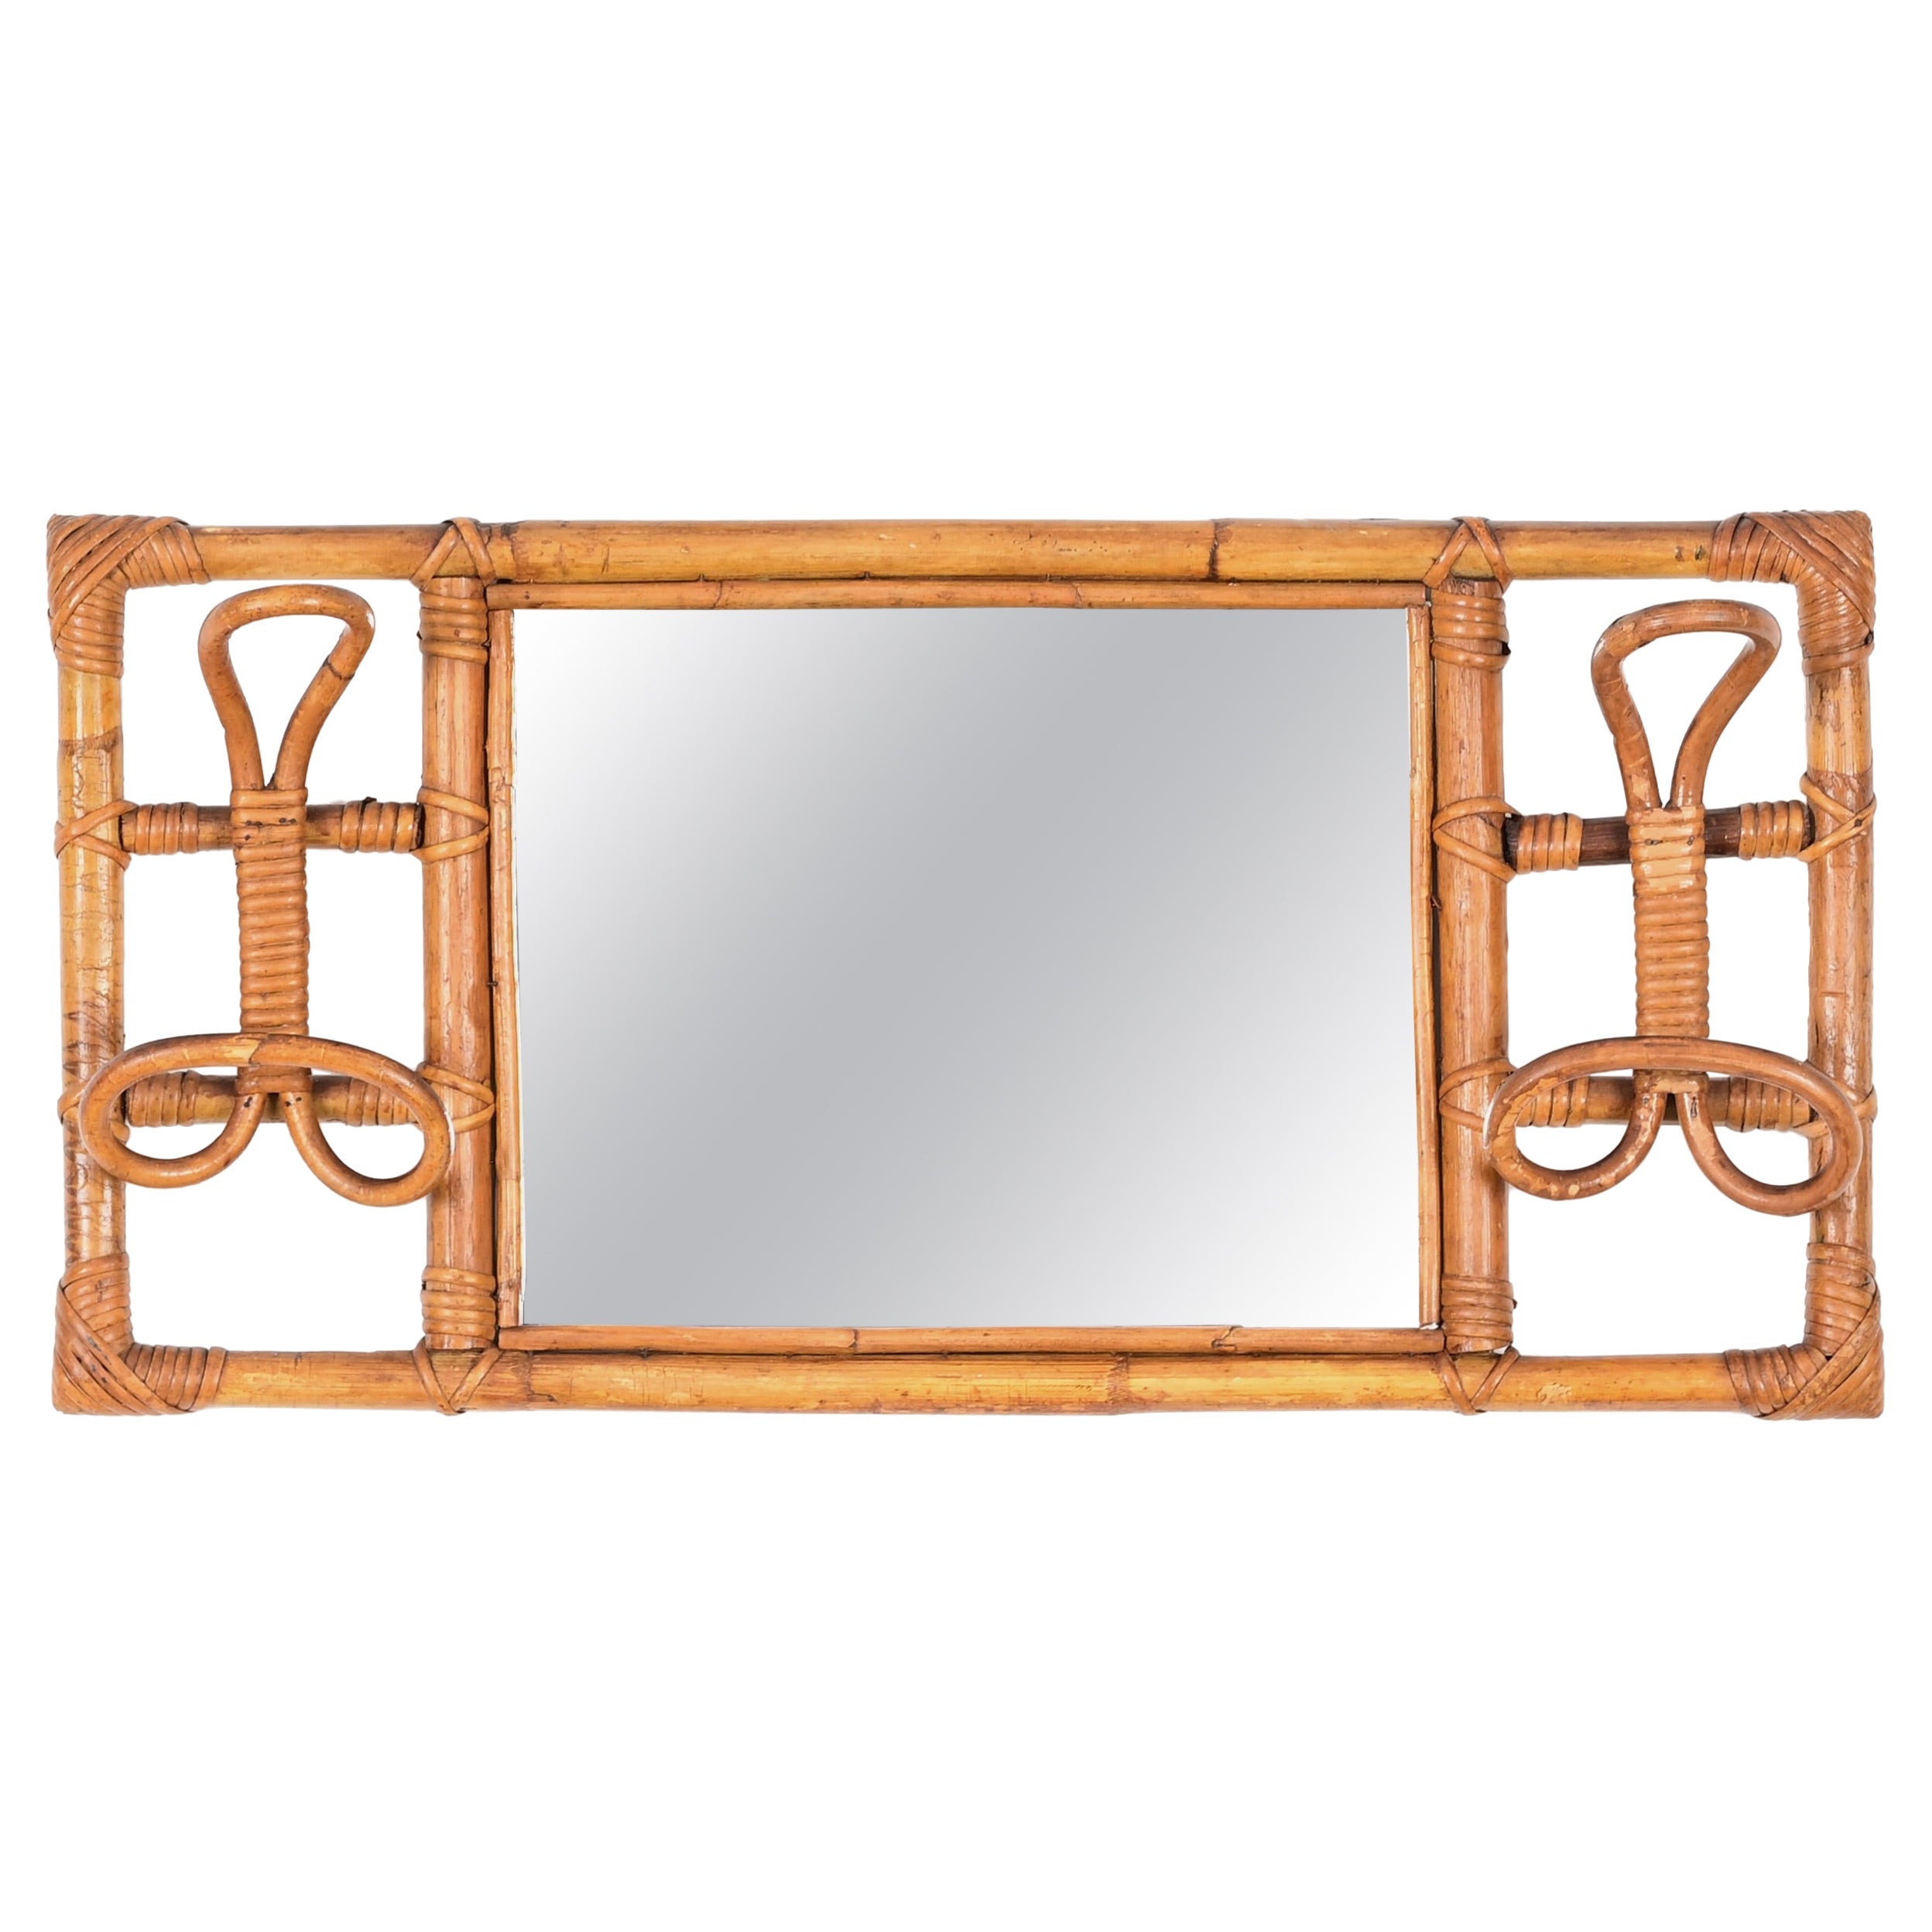 French Riviera Rectangular Mirror with Coat Hooks in Rattan, Wicker, Italy 1960s